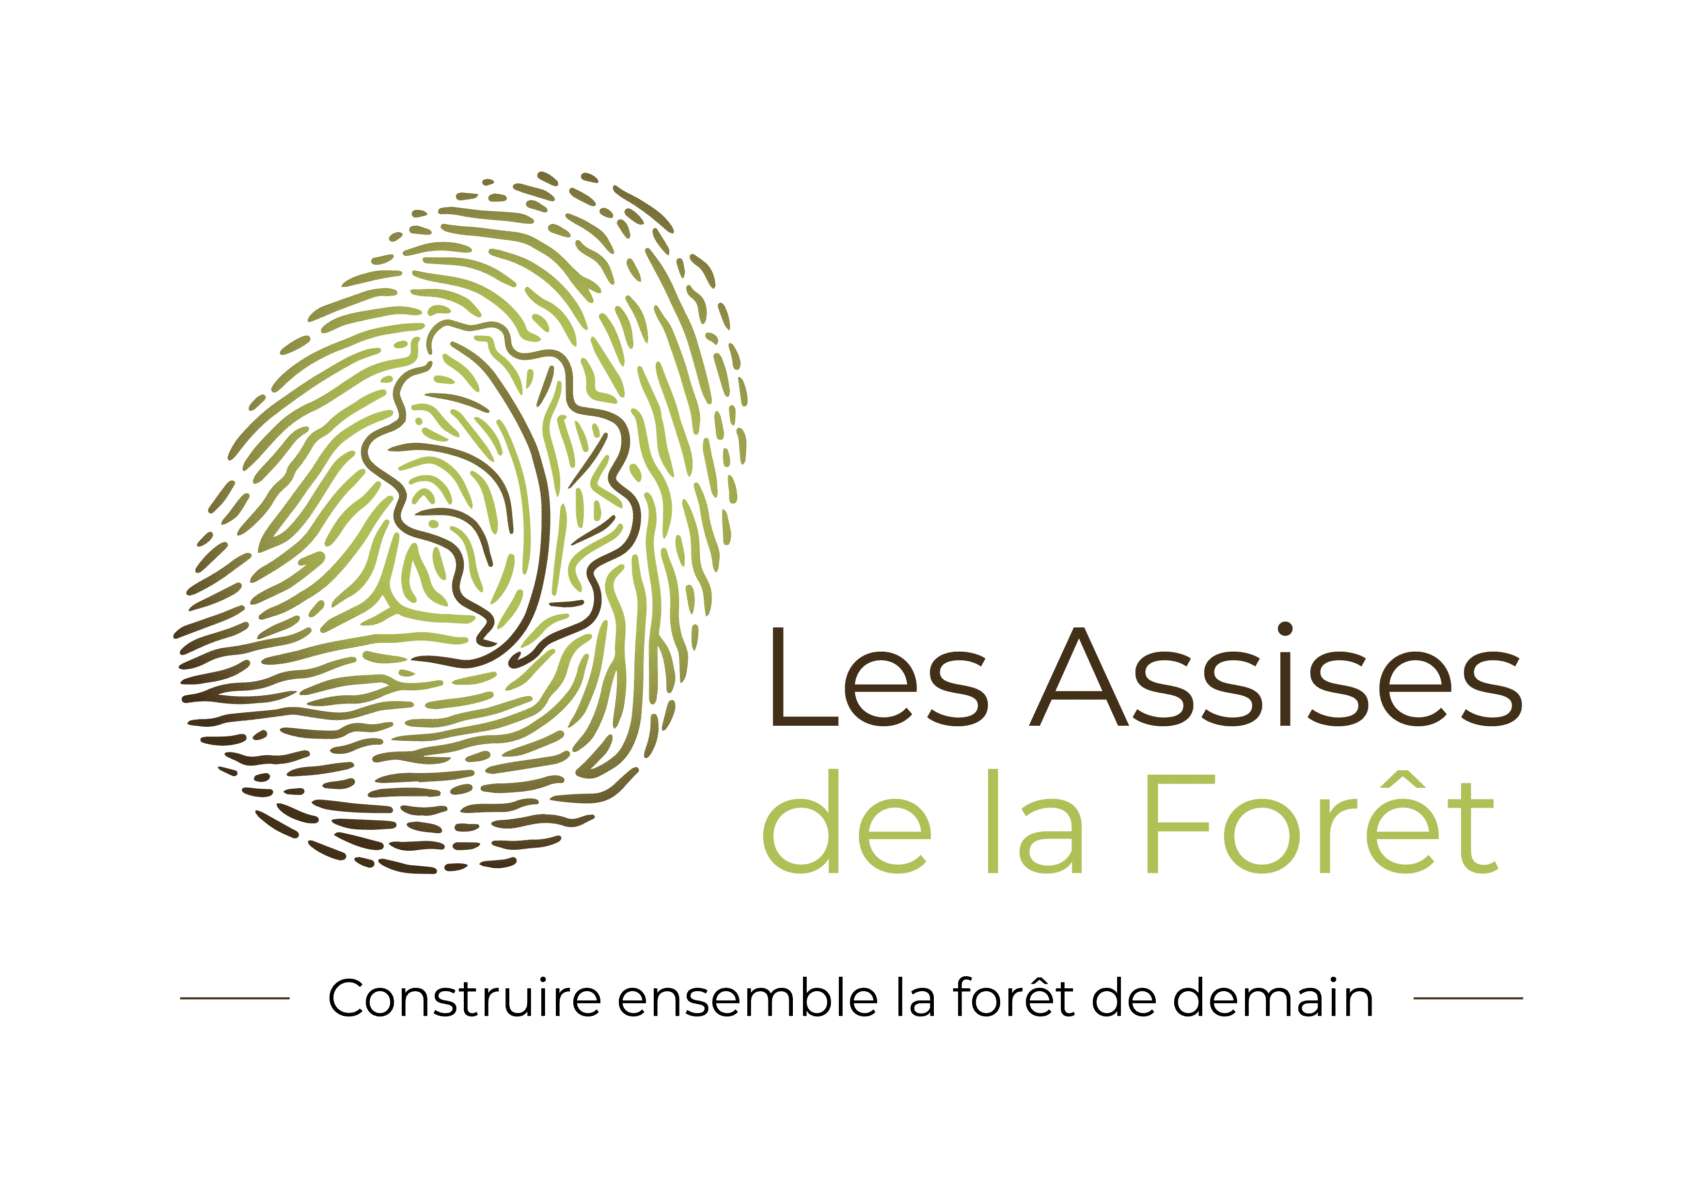 The forest conference